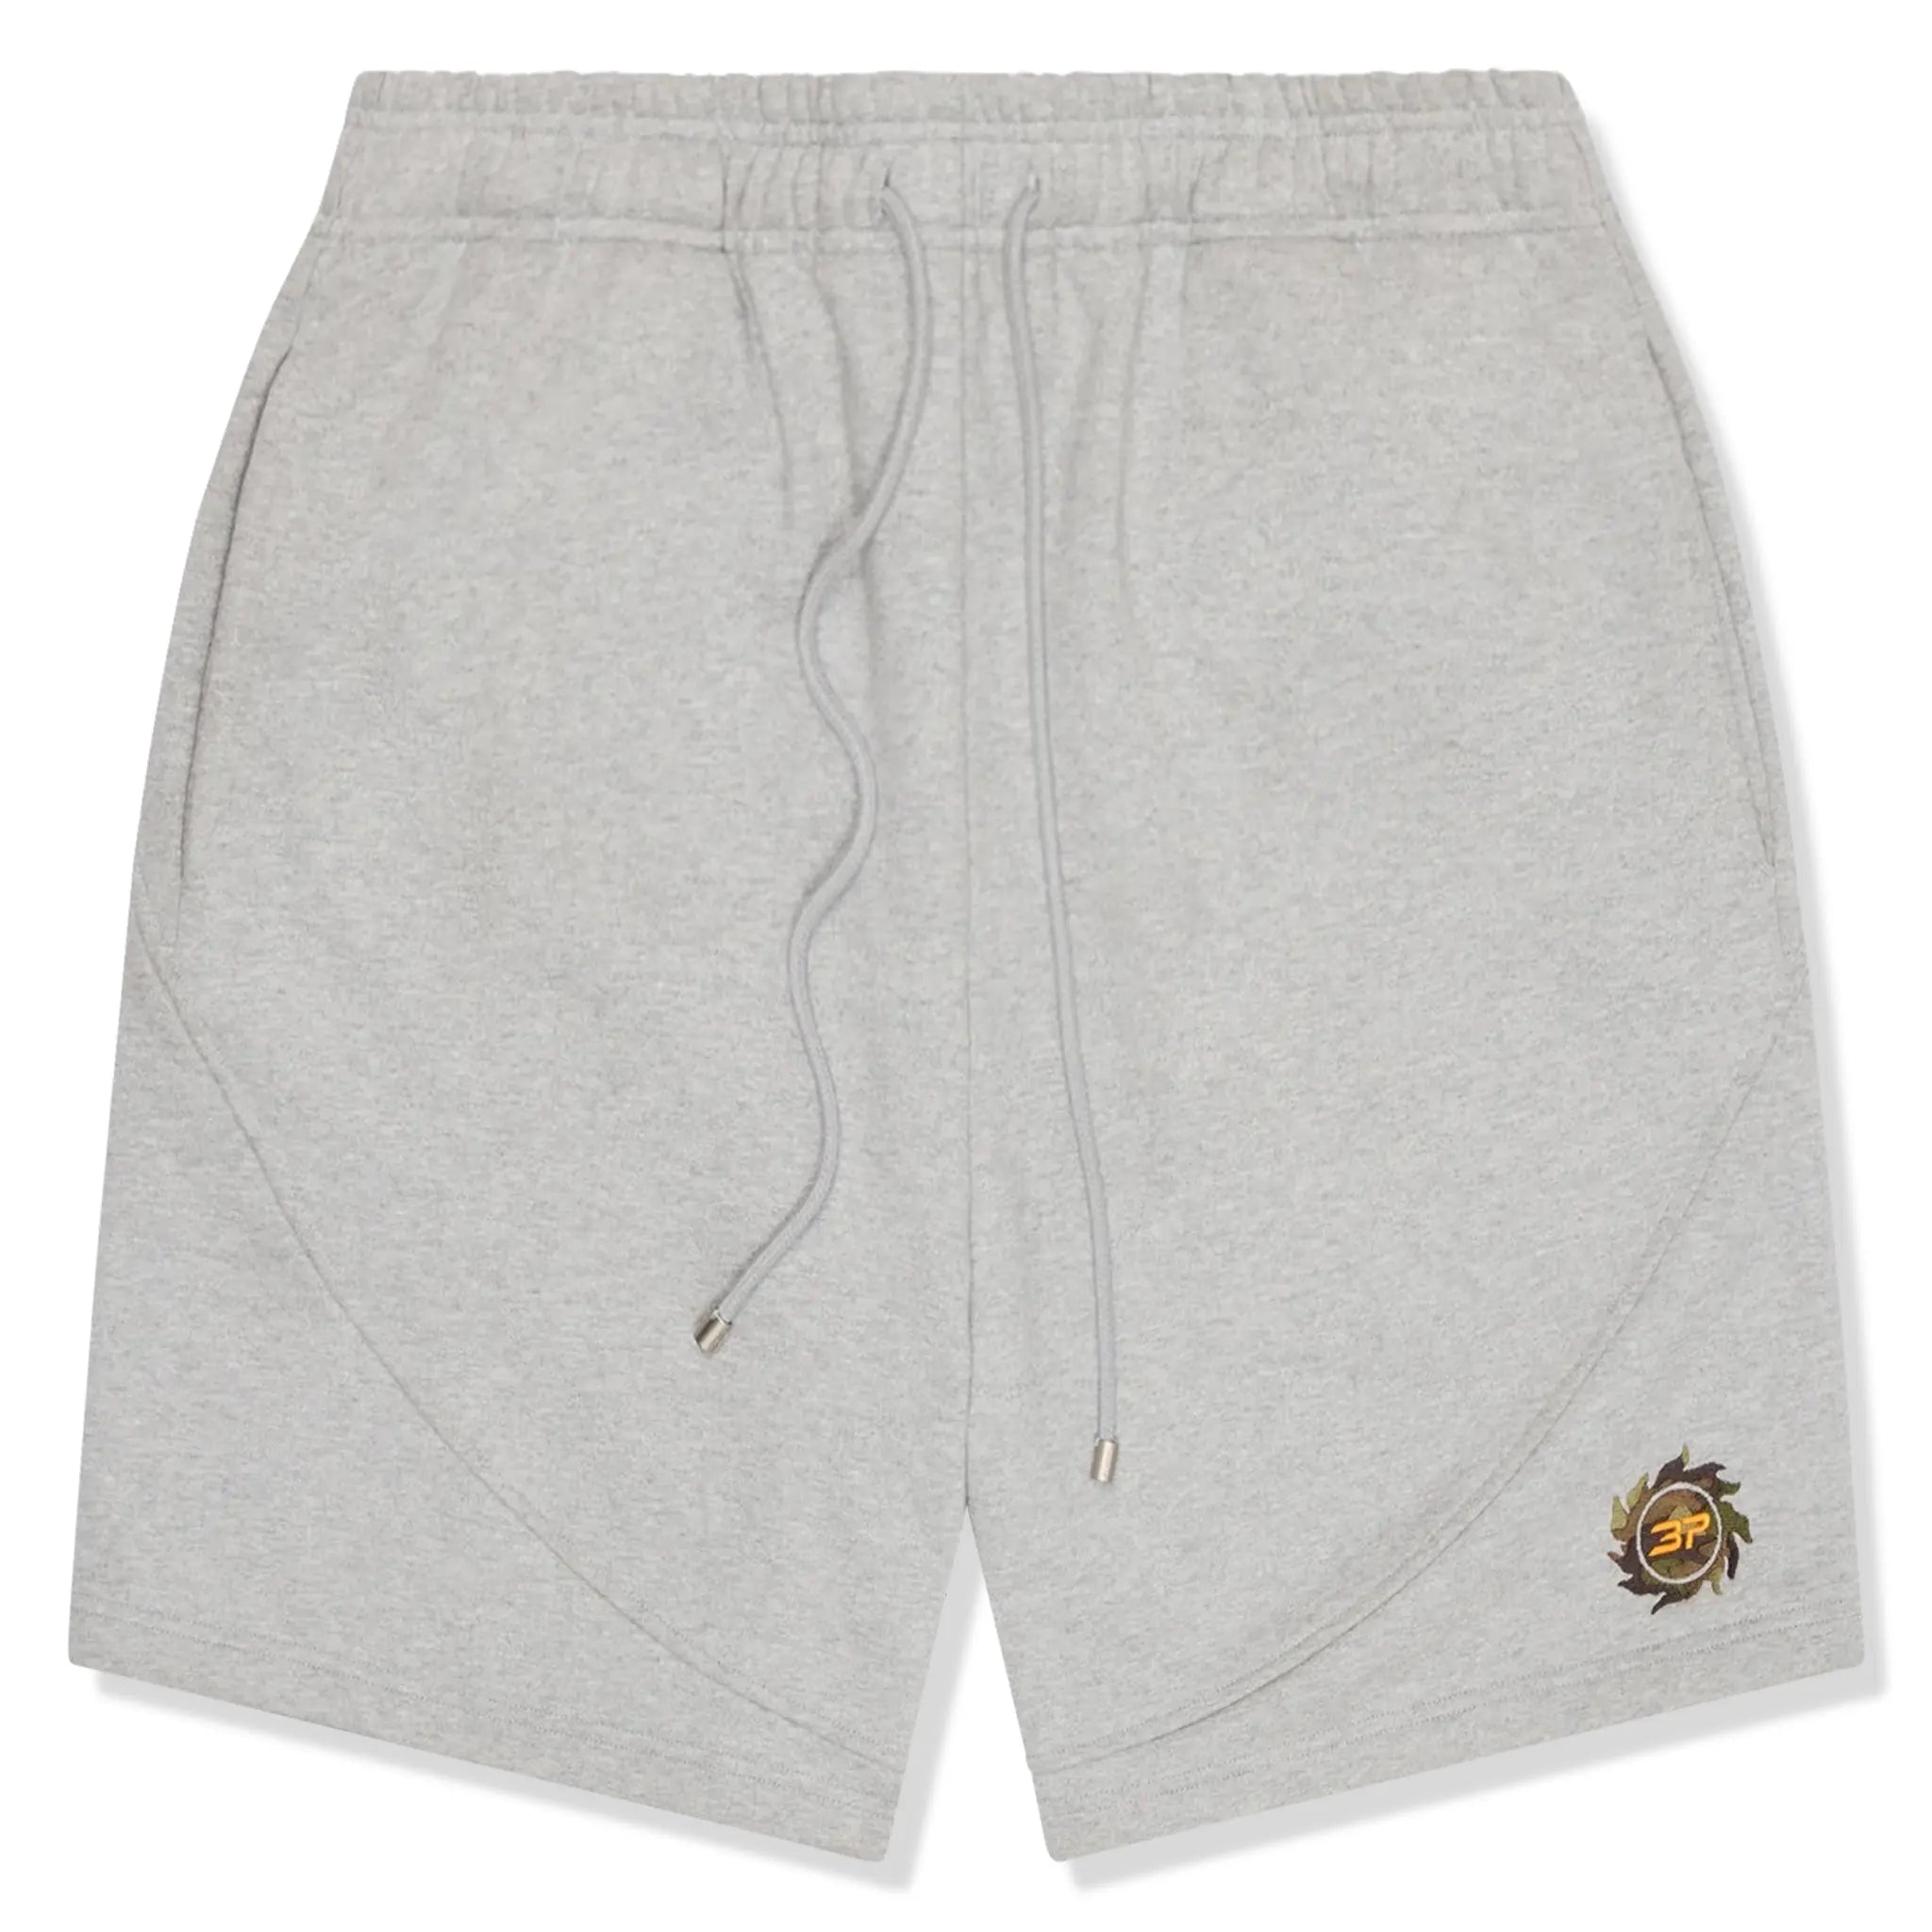 Front view of Broken Planet Heather Grey Sweat Shorts